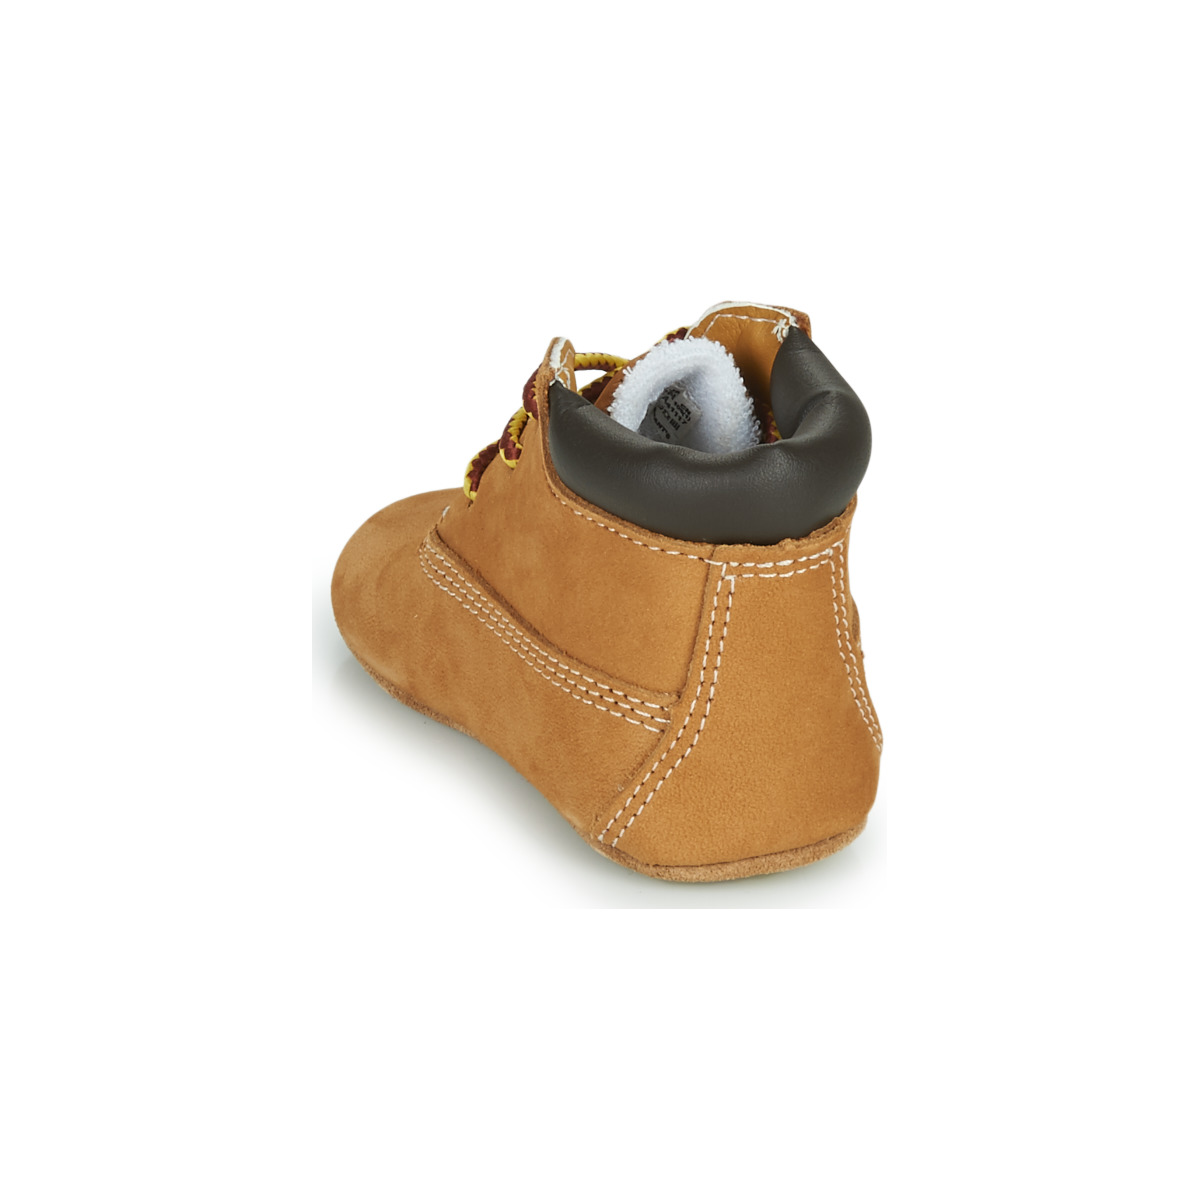 Timberland Blé / Marron CRIB BOOTIE WITH HAT aautGAon